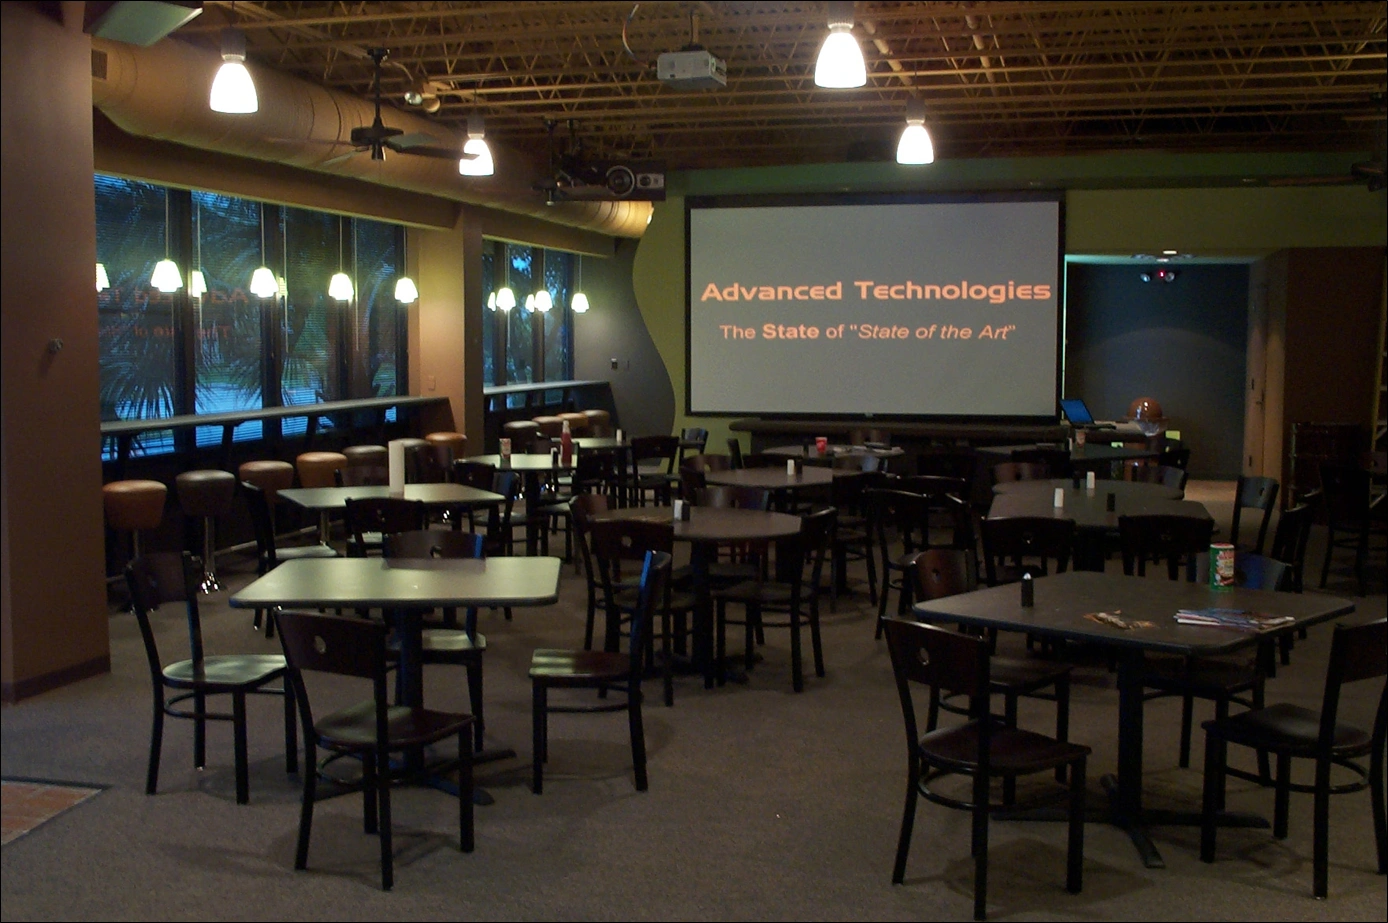 The best integrator in baton rouge 
Conference rooms, video walls, projection systems, media rooms, 